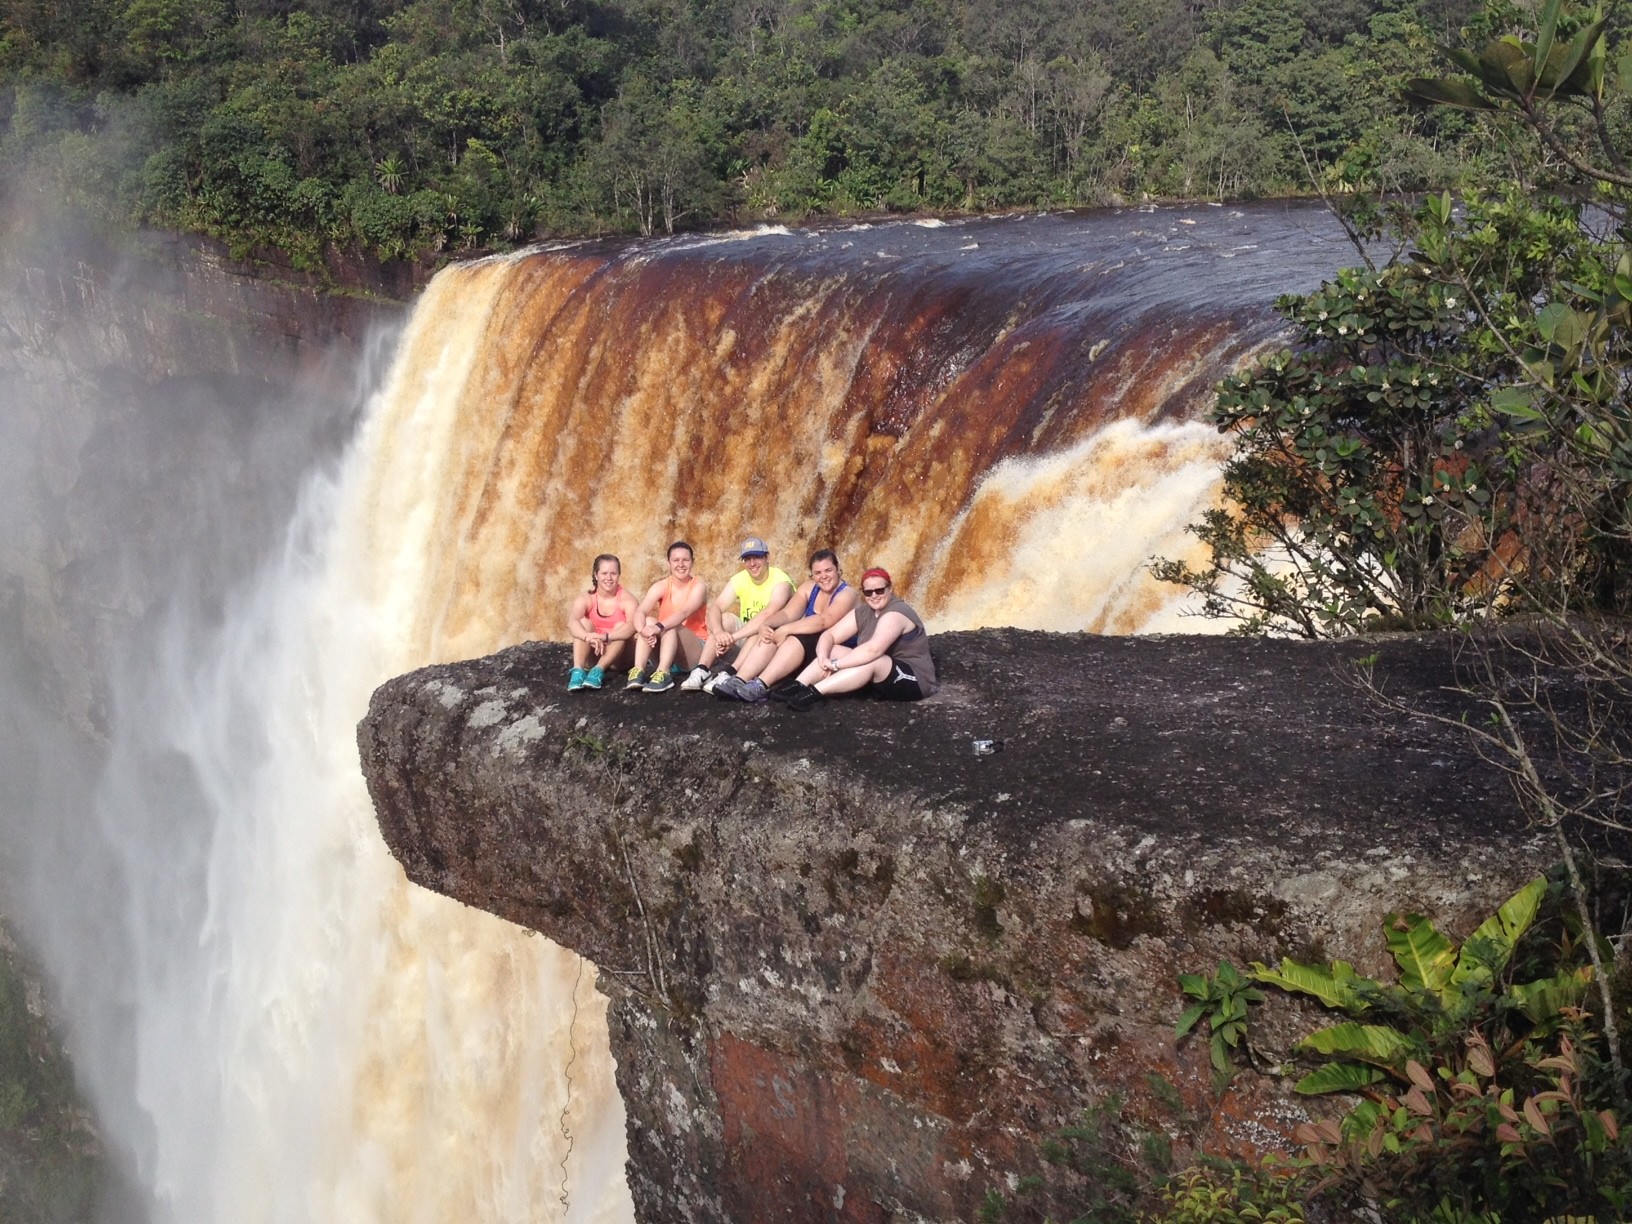 Kayleigh Morein, second from left, with her travel partners from Misericordia University at Kaieteur Falls in Guyana, a waterfall four times higher than Niagara Falls.